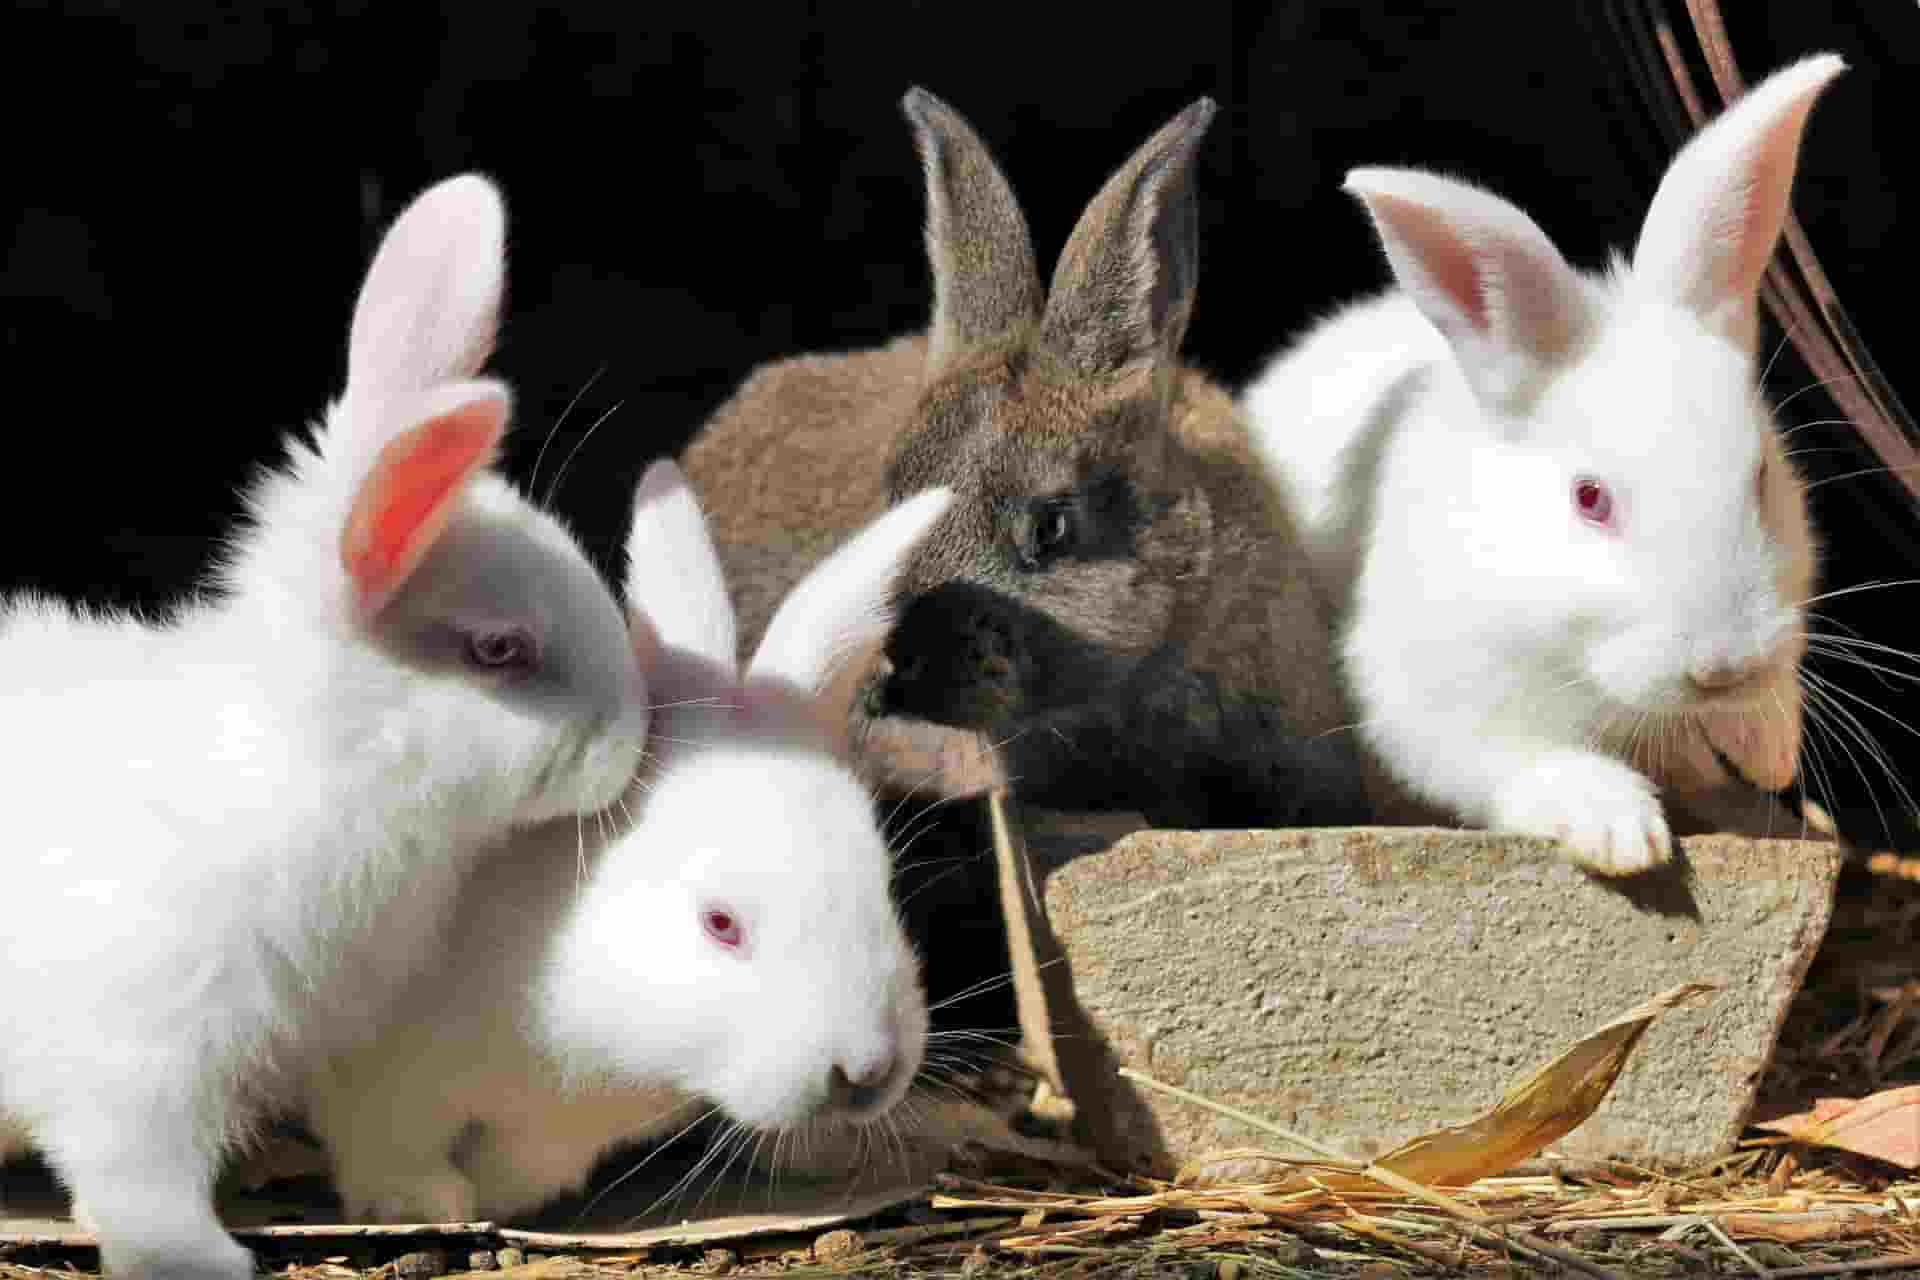 can rabbits eat oats without any issue?